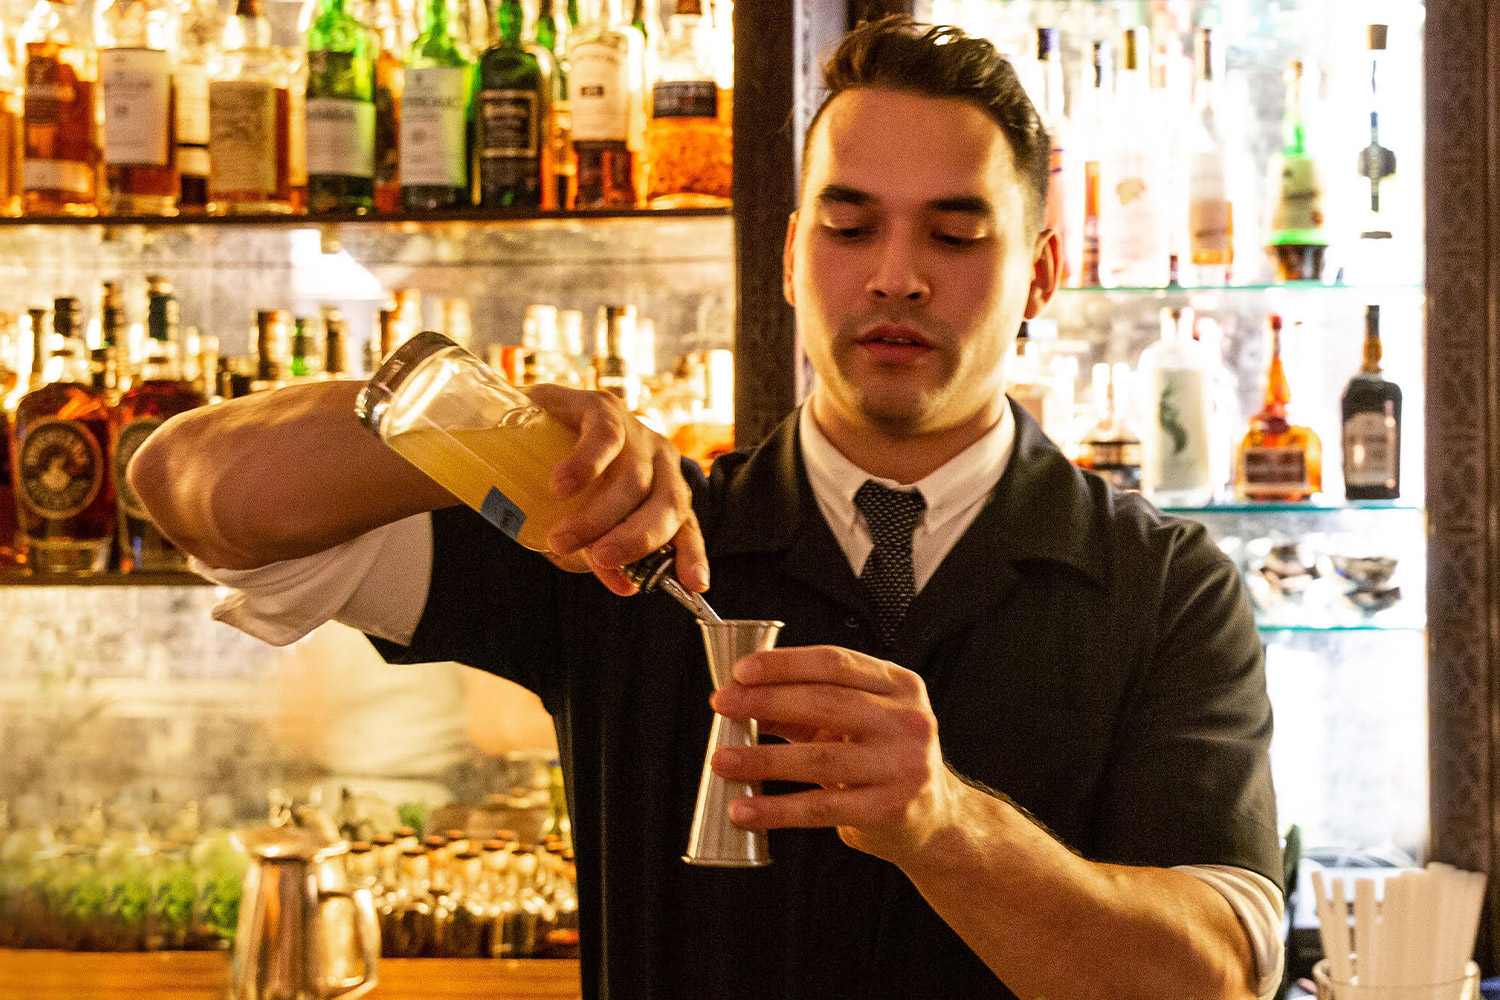 Jonathan Lind pouring and mixing drinks at a bar